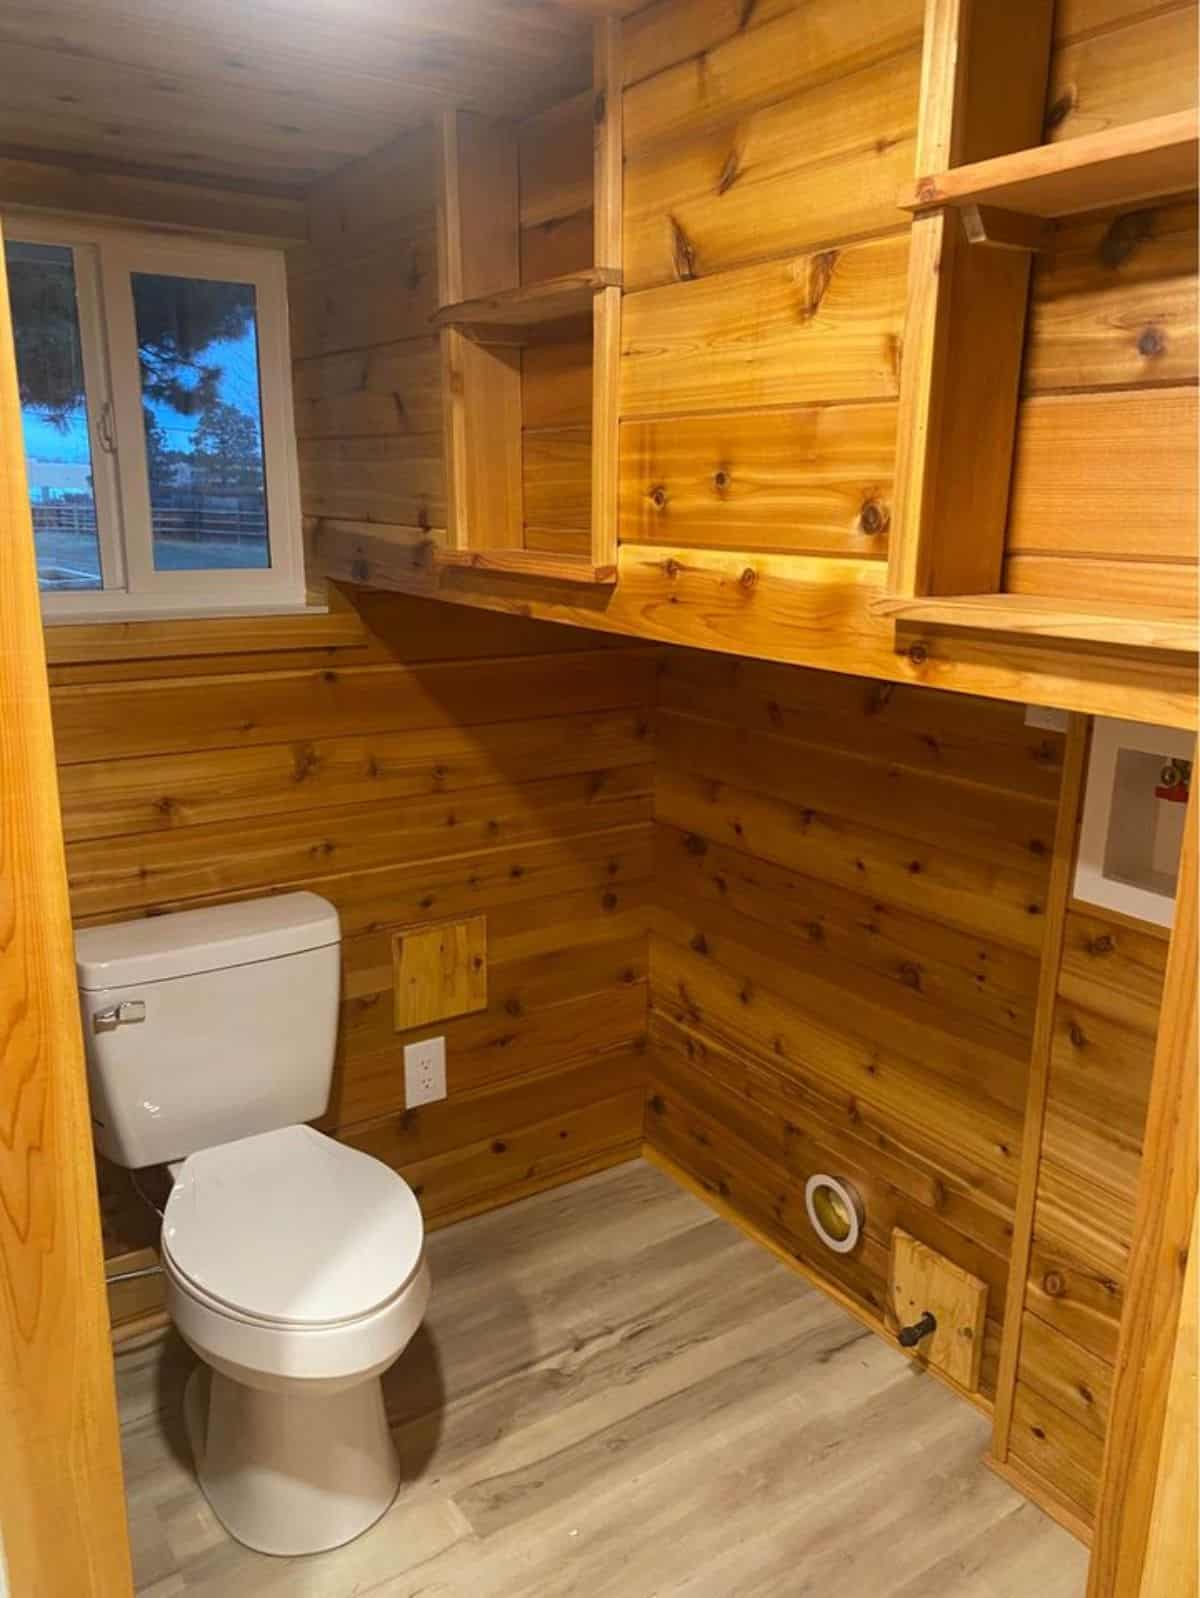 storage cabinets on the left toilet